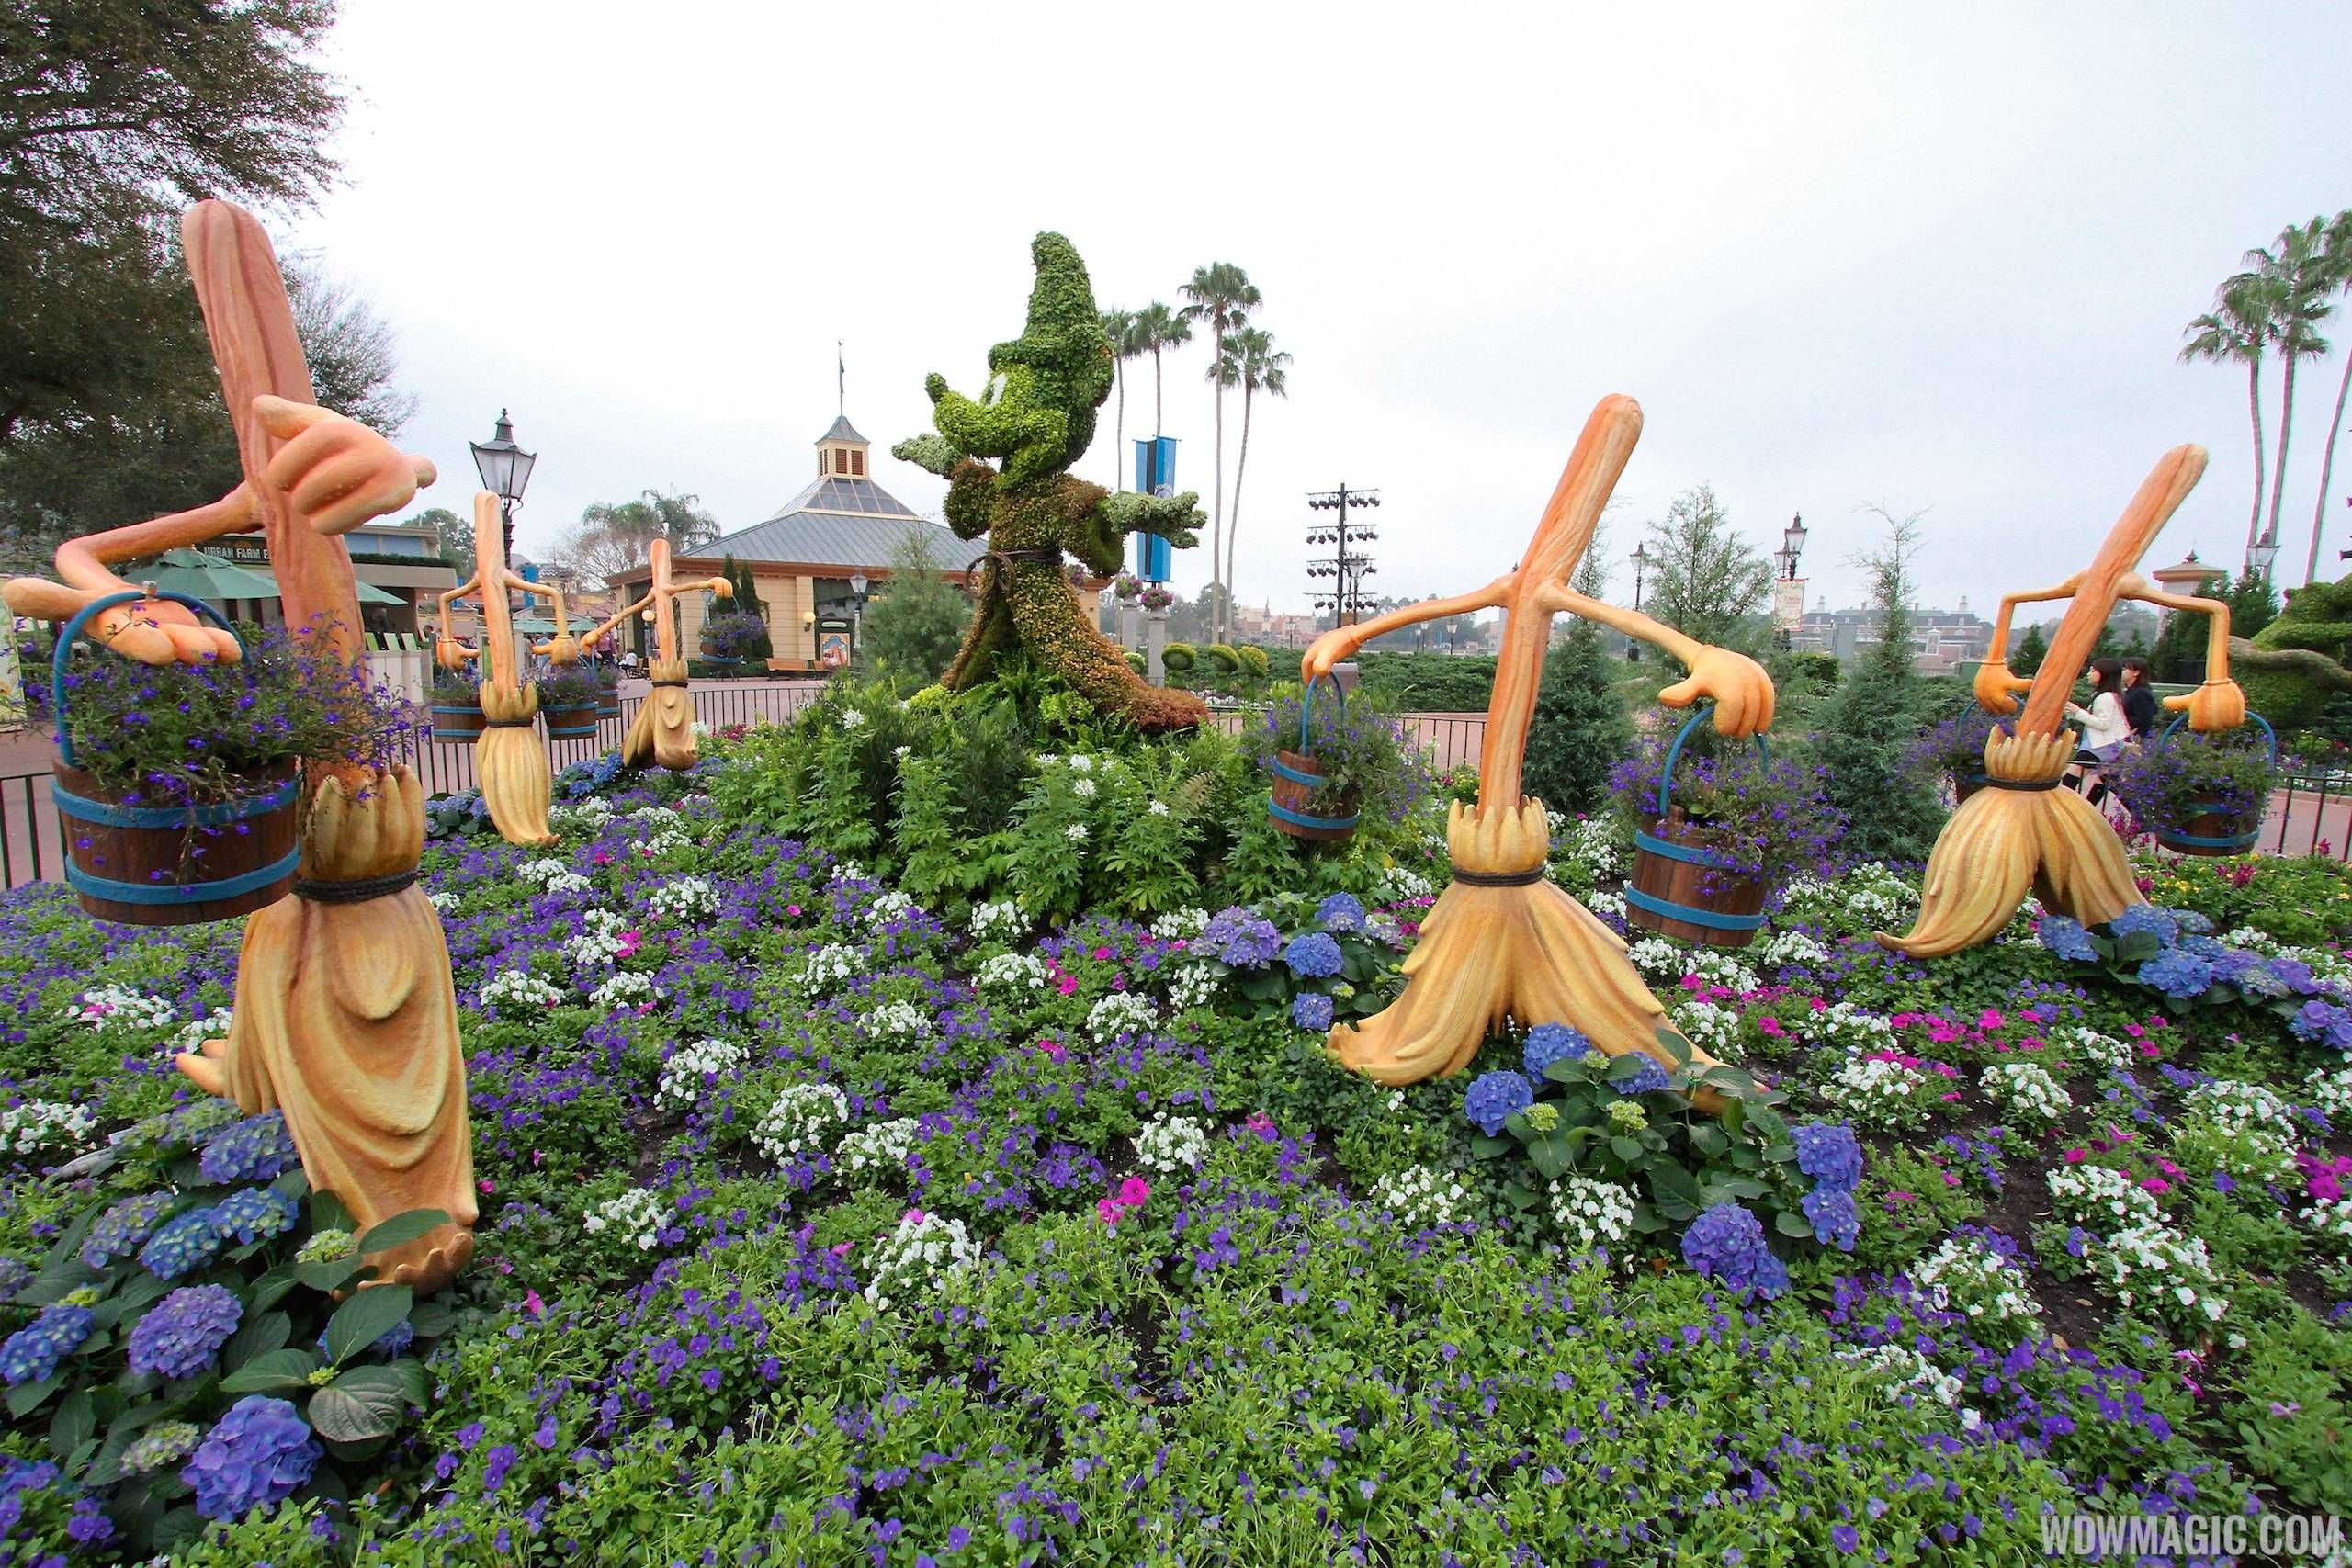 2014 Epcot Flower and Garden Festival - Sorcerer Mickey topiary at World Showcase Plaza